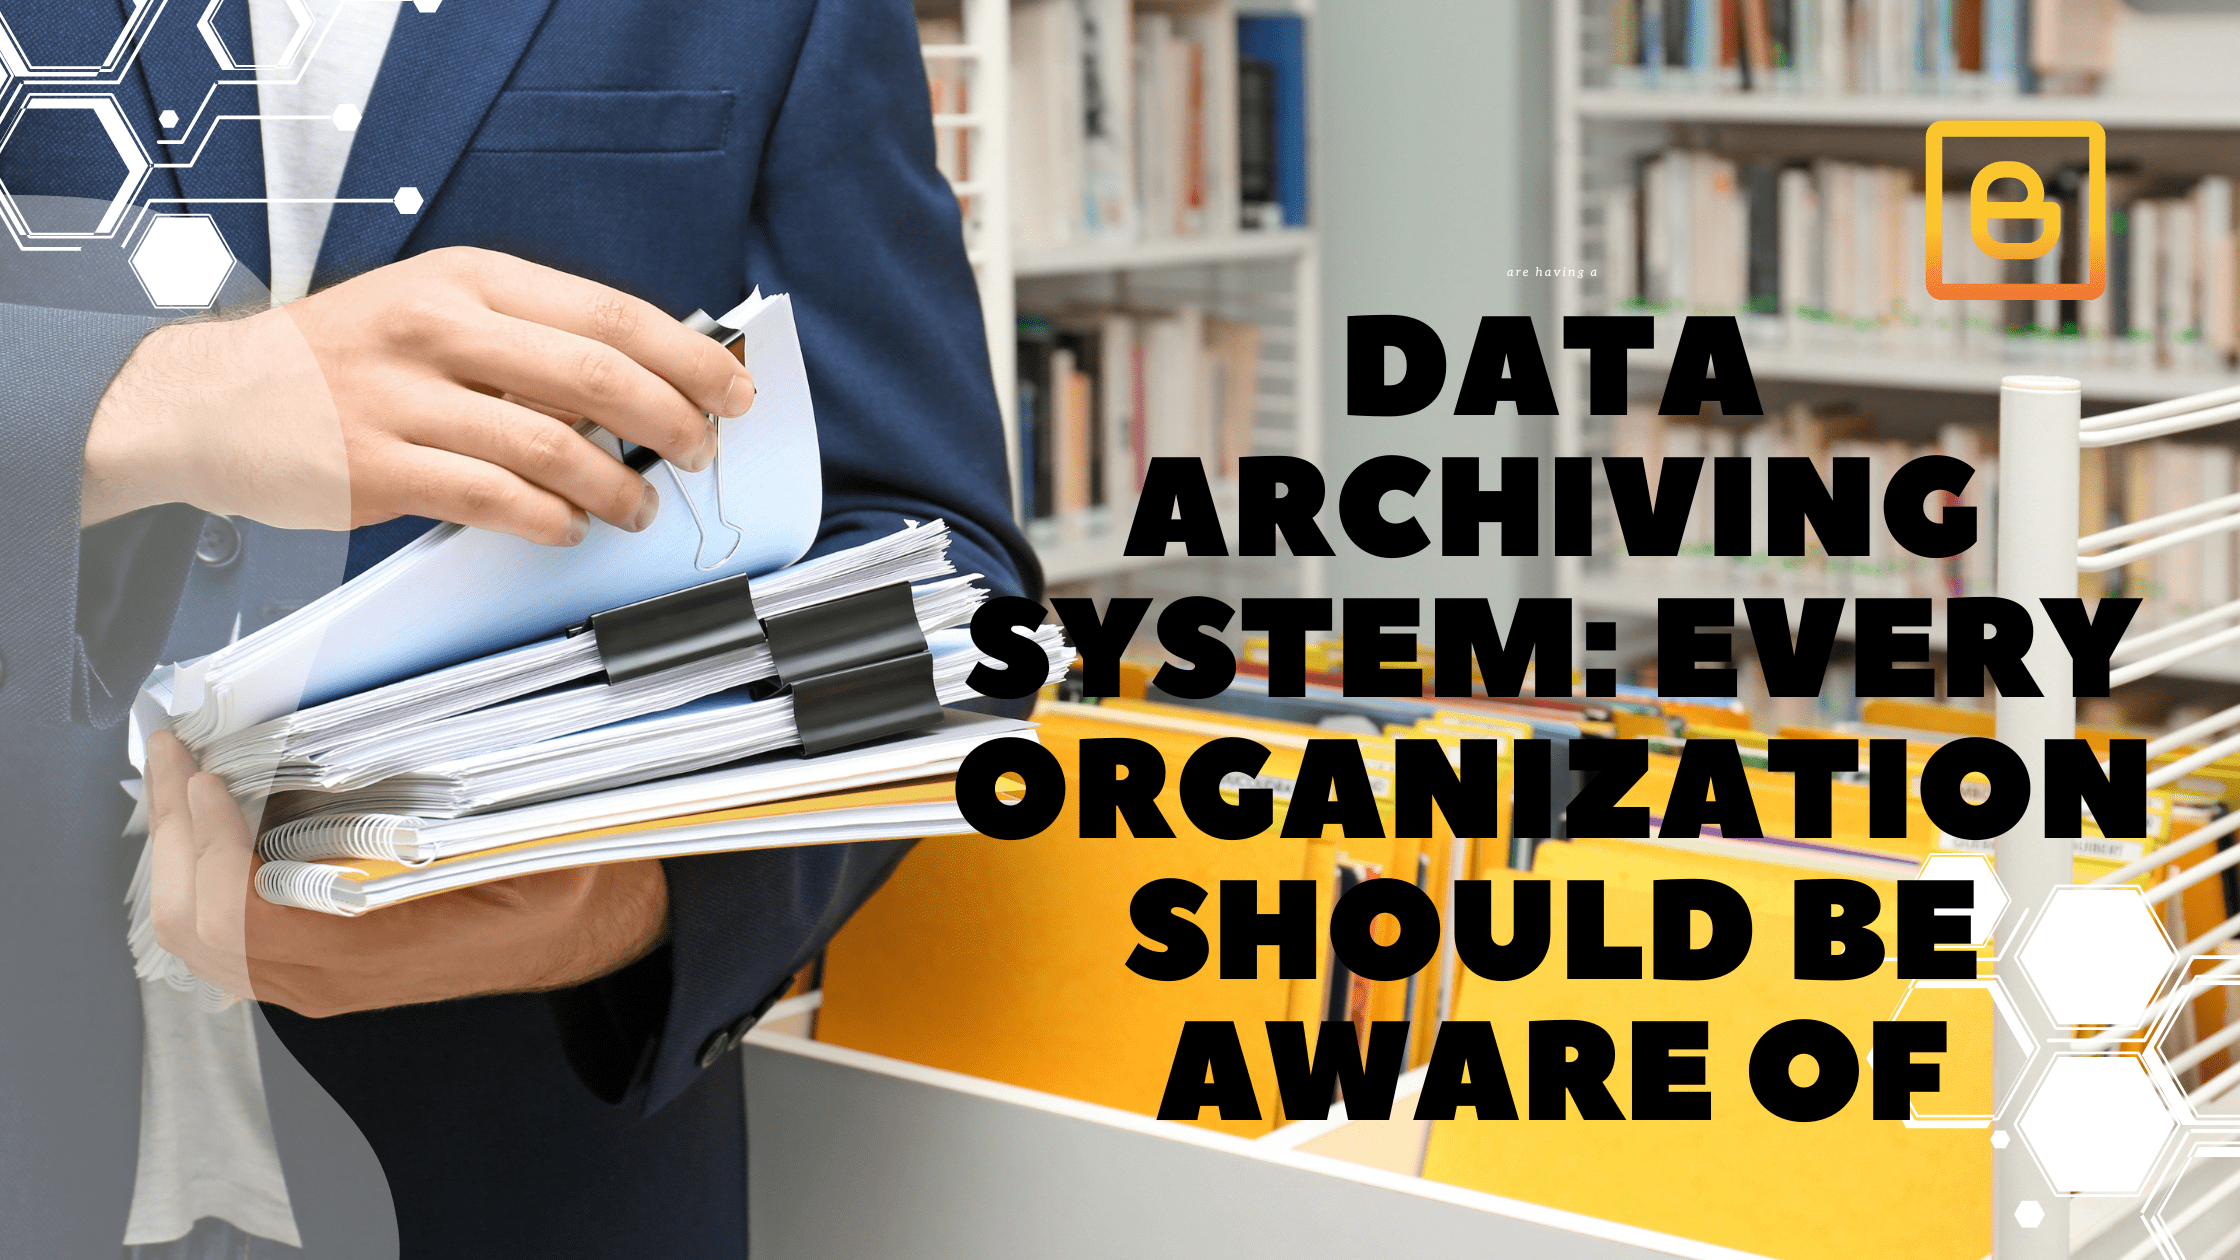 Data Archiving System: Every Organization Should Be Aware of